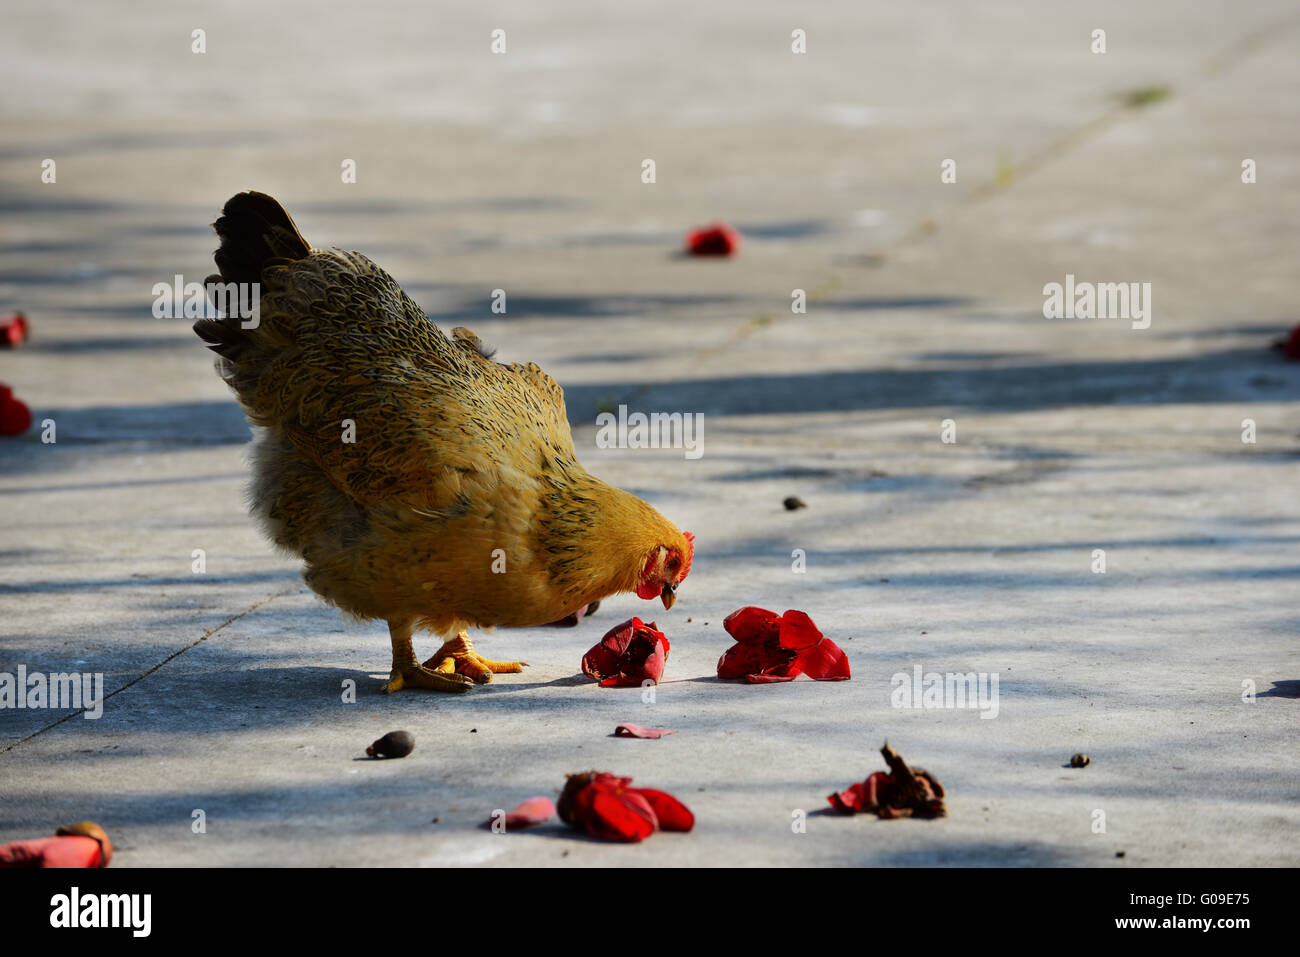 Walking hen in rural area with kapok flowers Stock Photo